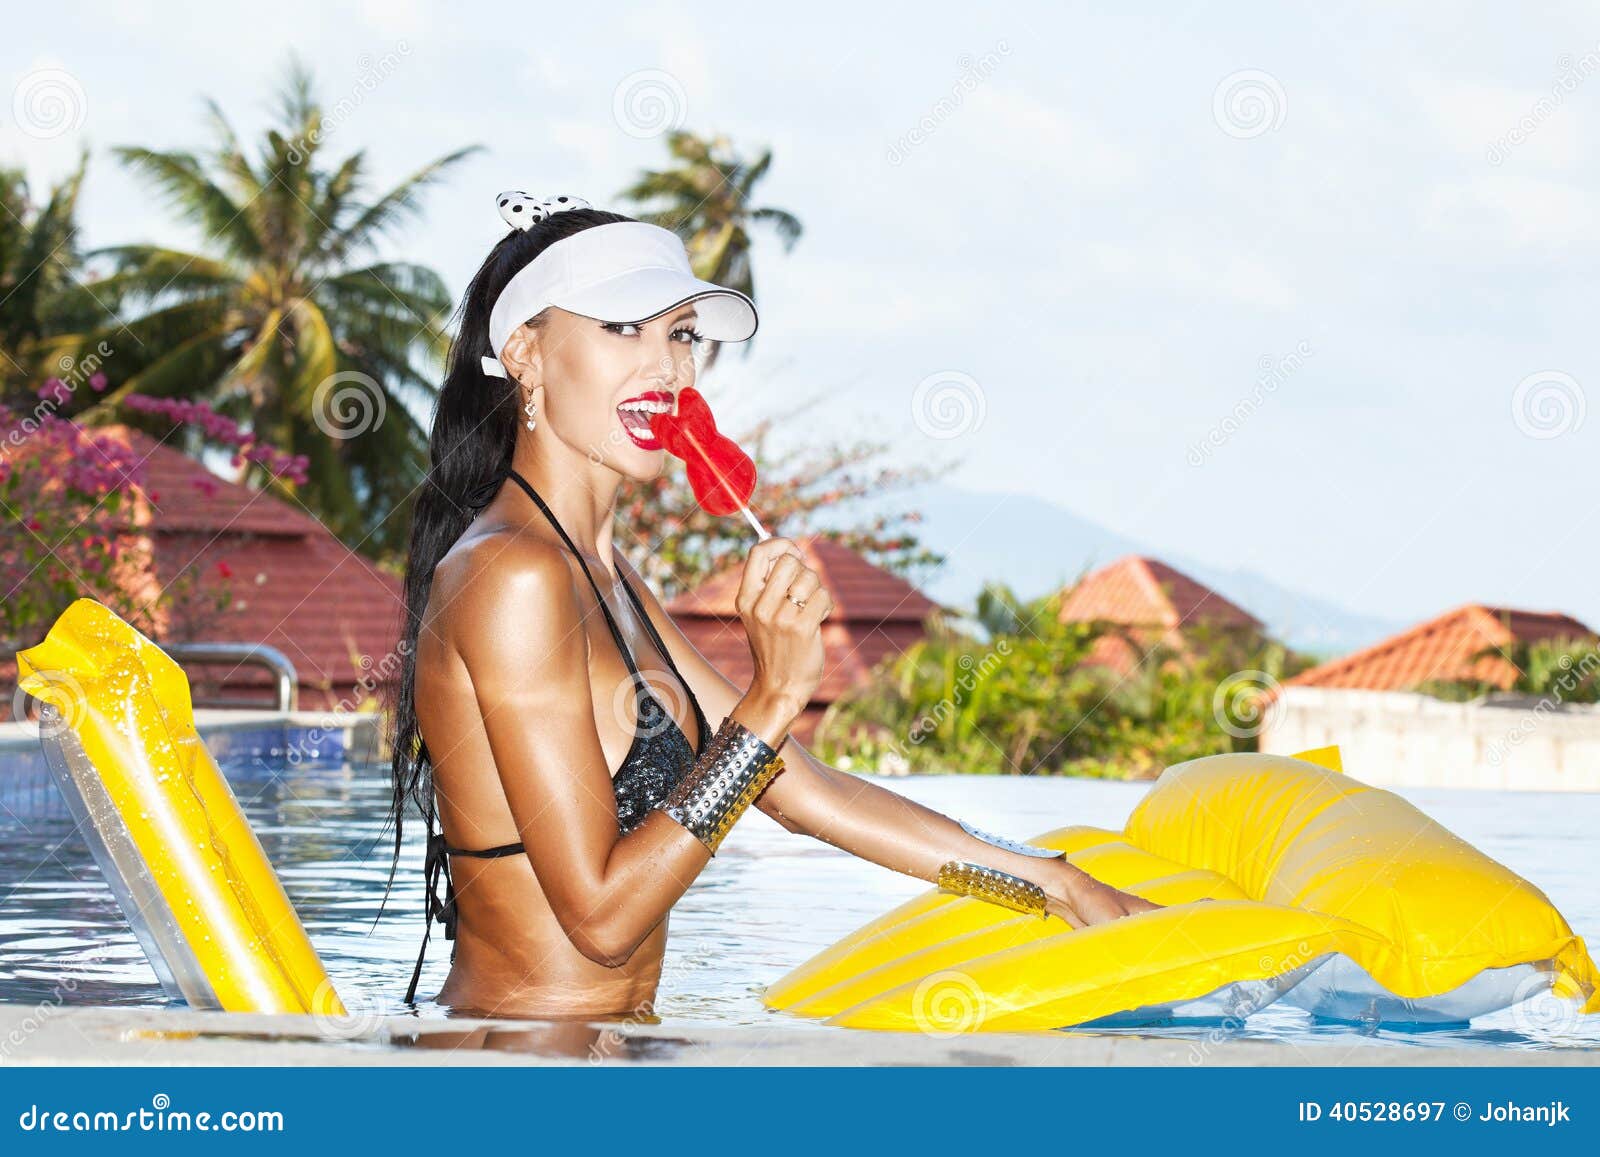 Young Sexual Woman Sucking Lollipop Stock Image photo